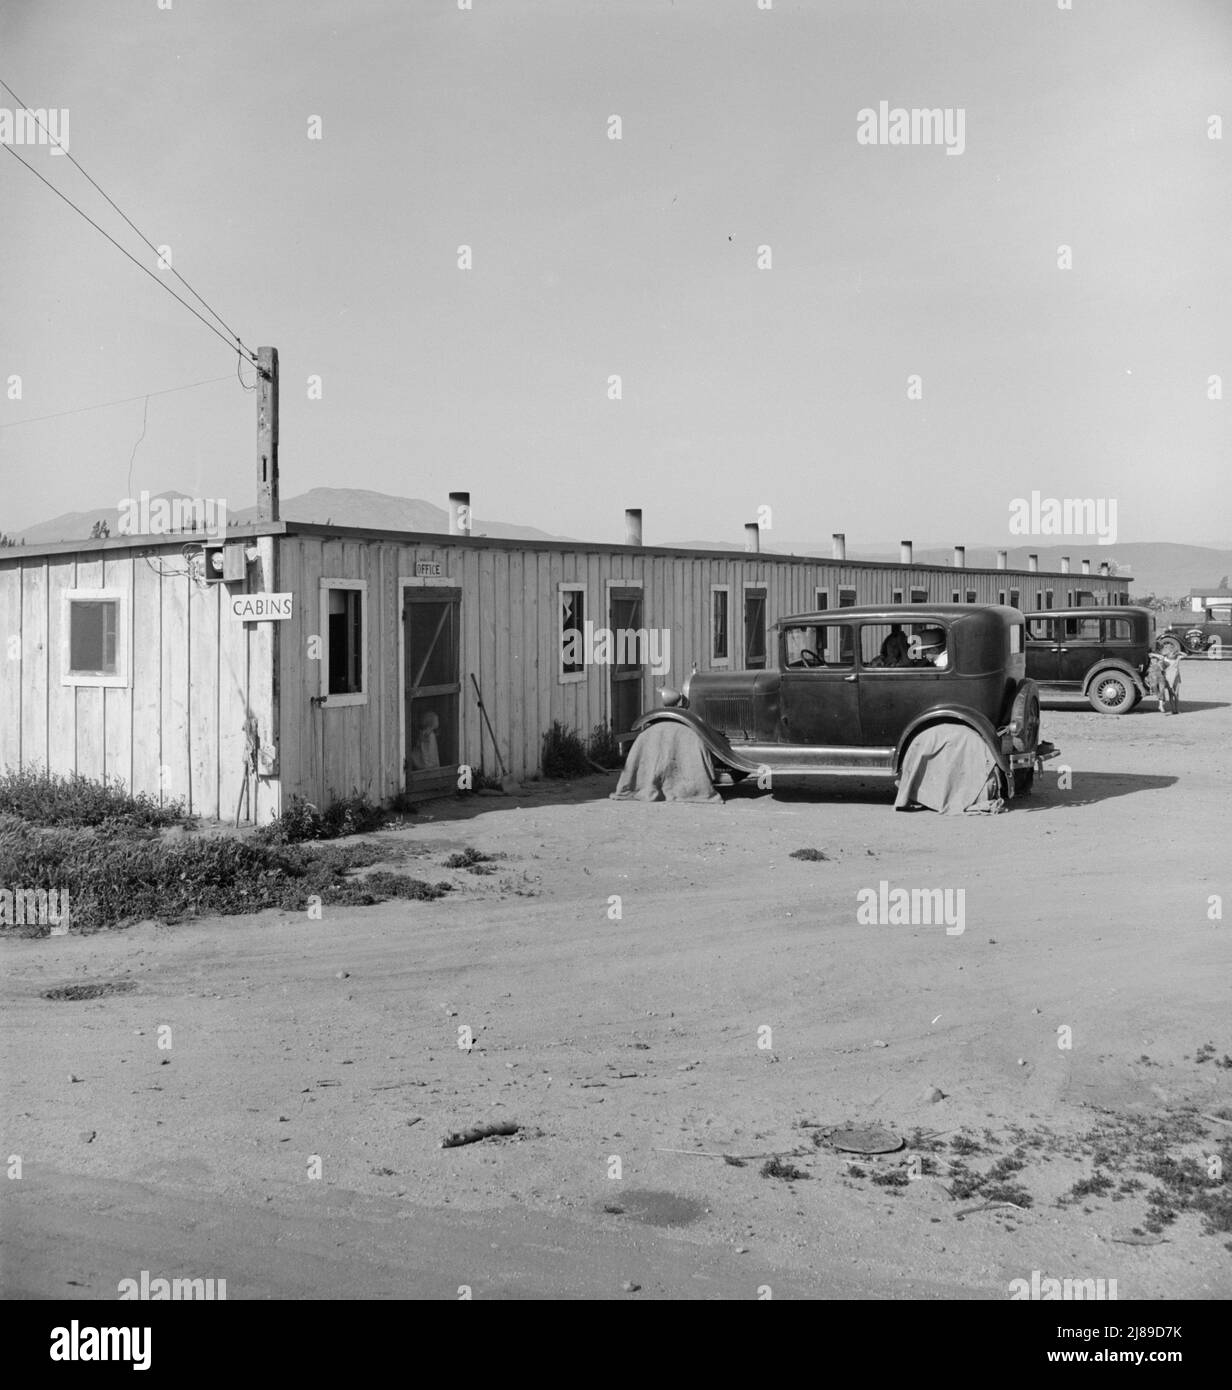 Arkansawyers auto camp. Ten cabins which rent for ten dollars a month with iron bed and electric light, one room. Greenfield, Salinas Valley, California. [Very basic accommodation for farm workers from the state of Arkansas]. Stock Photo